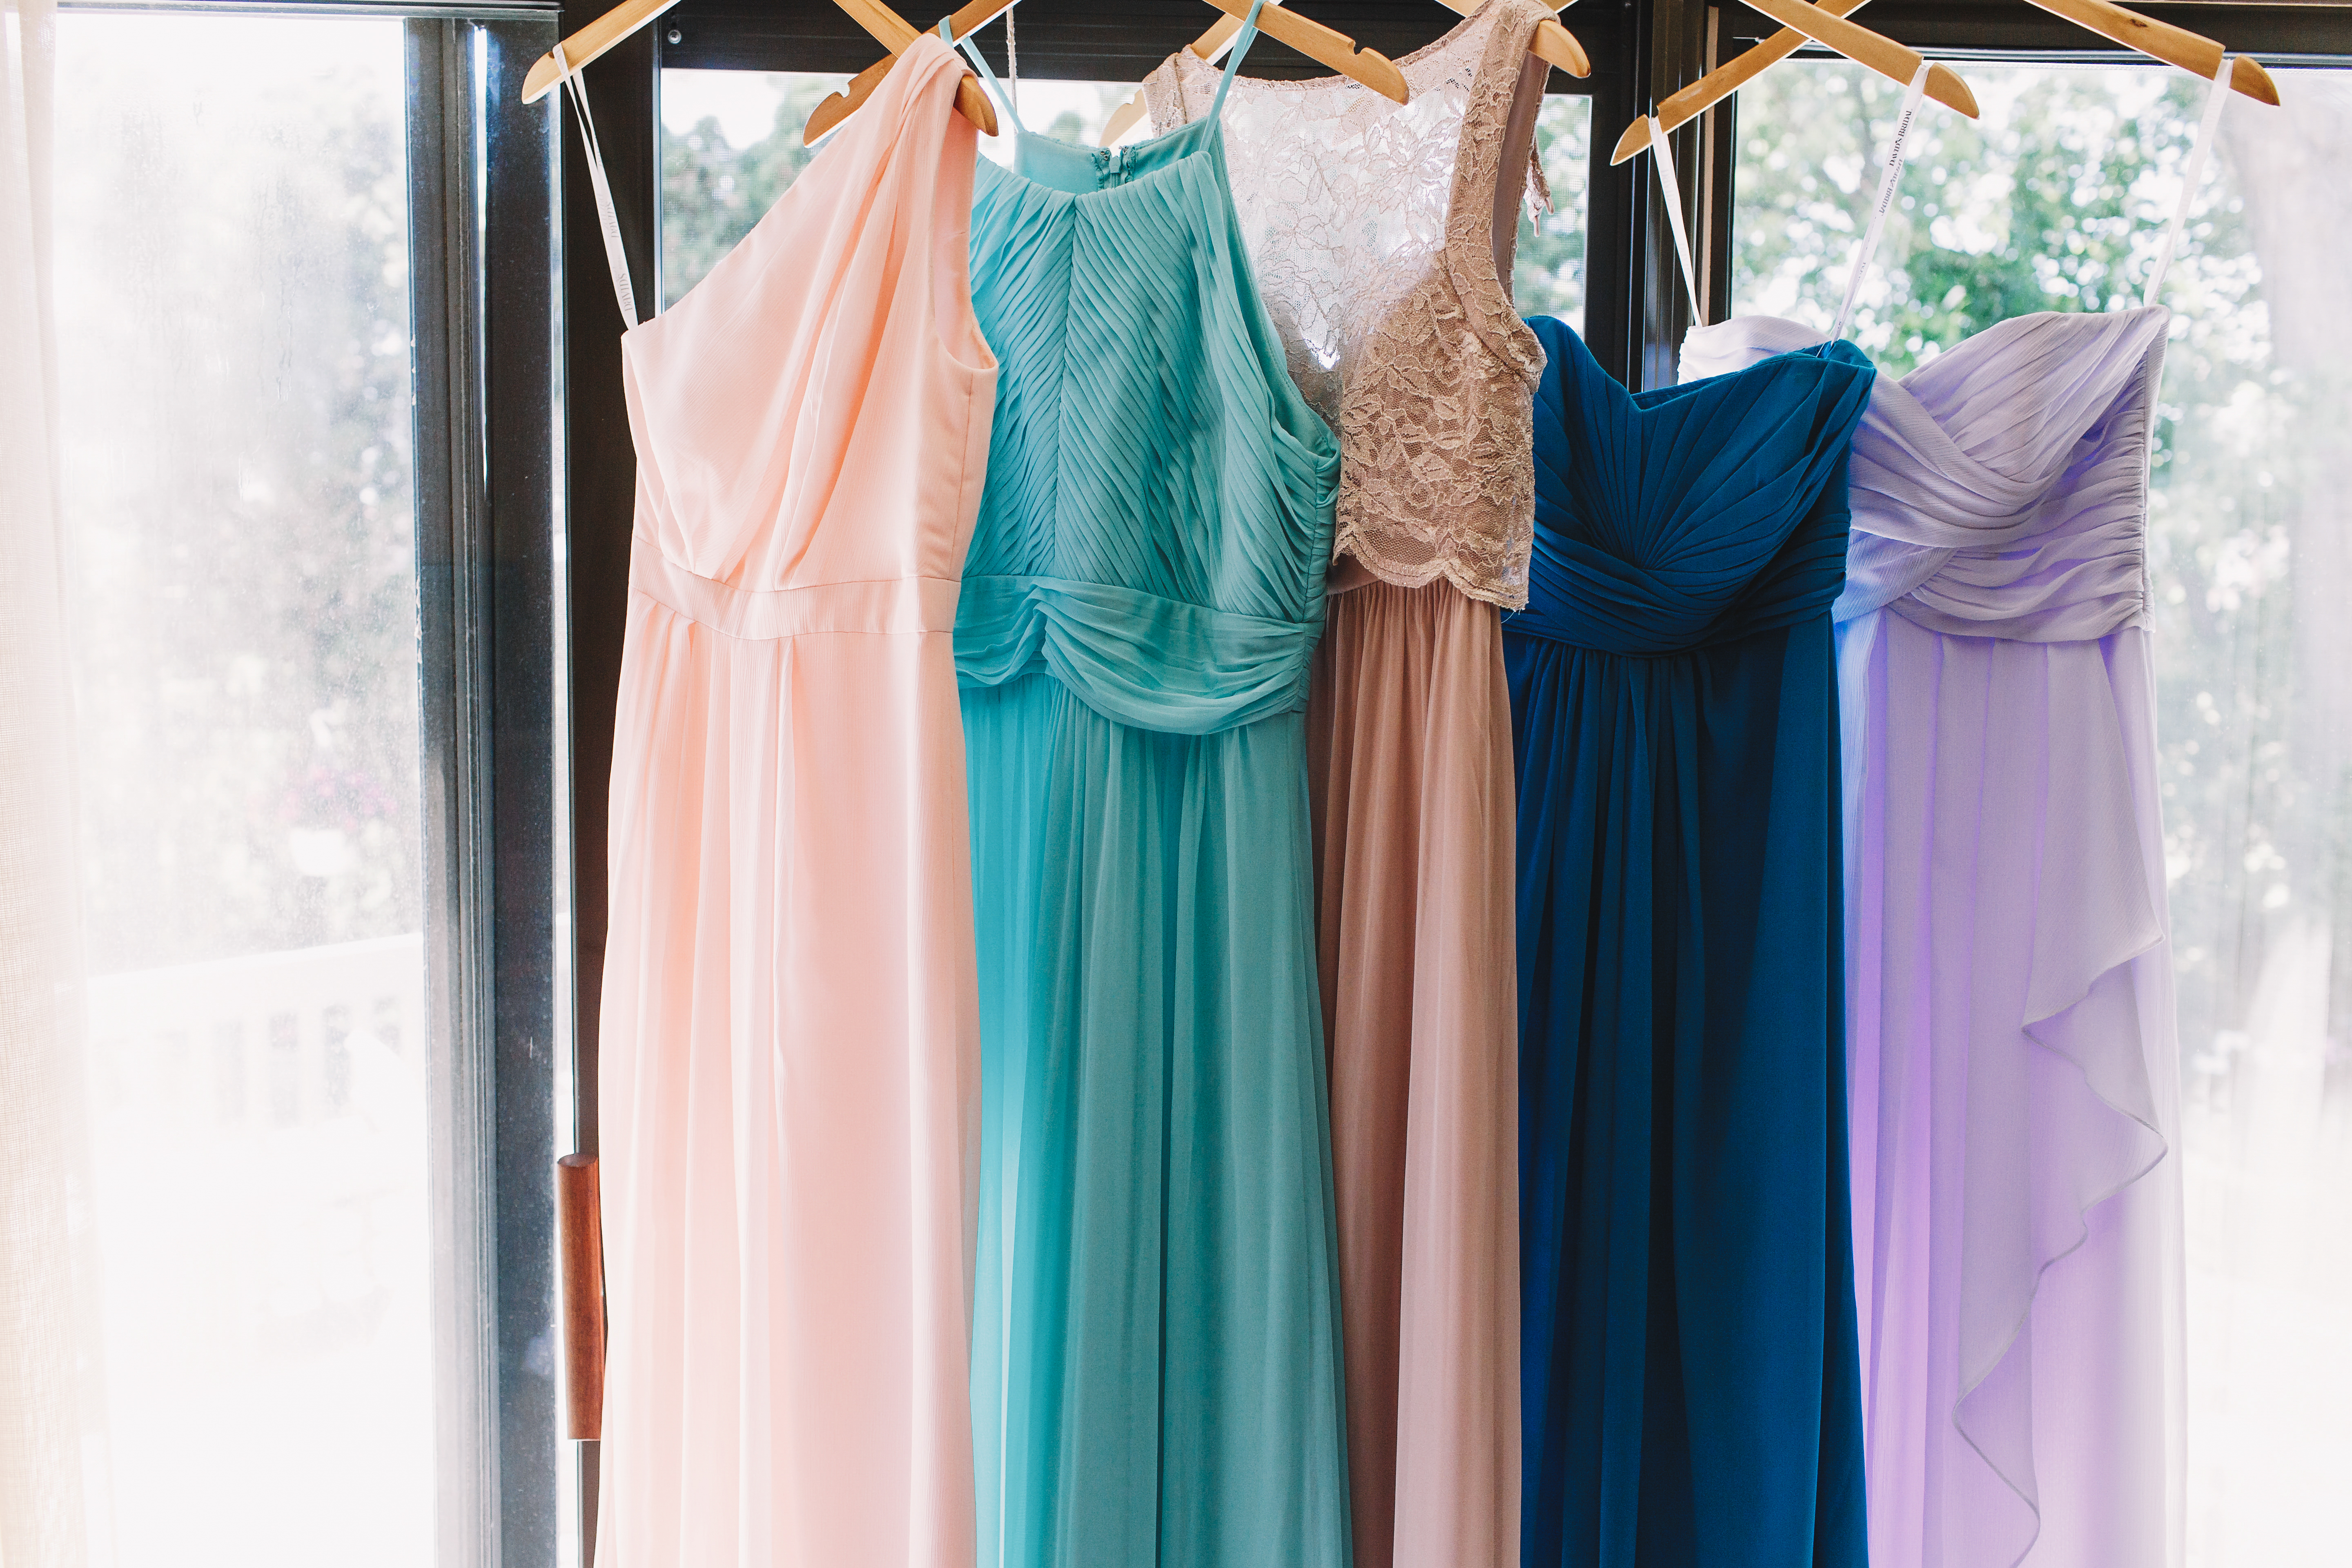 Several bridesmaid dresses hanging from a rod | Source: Shutterstock